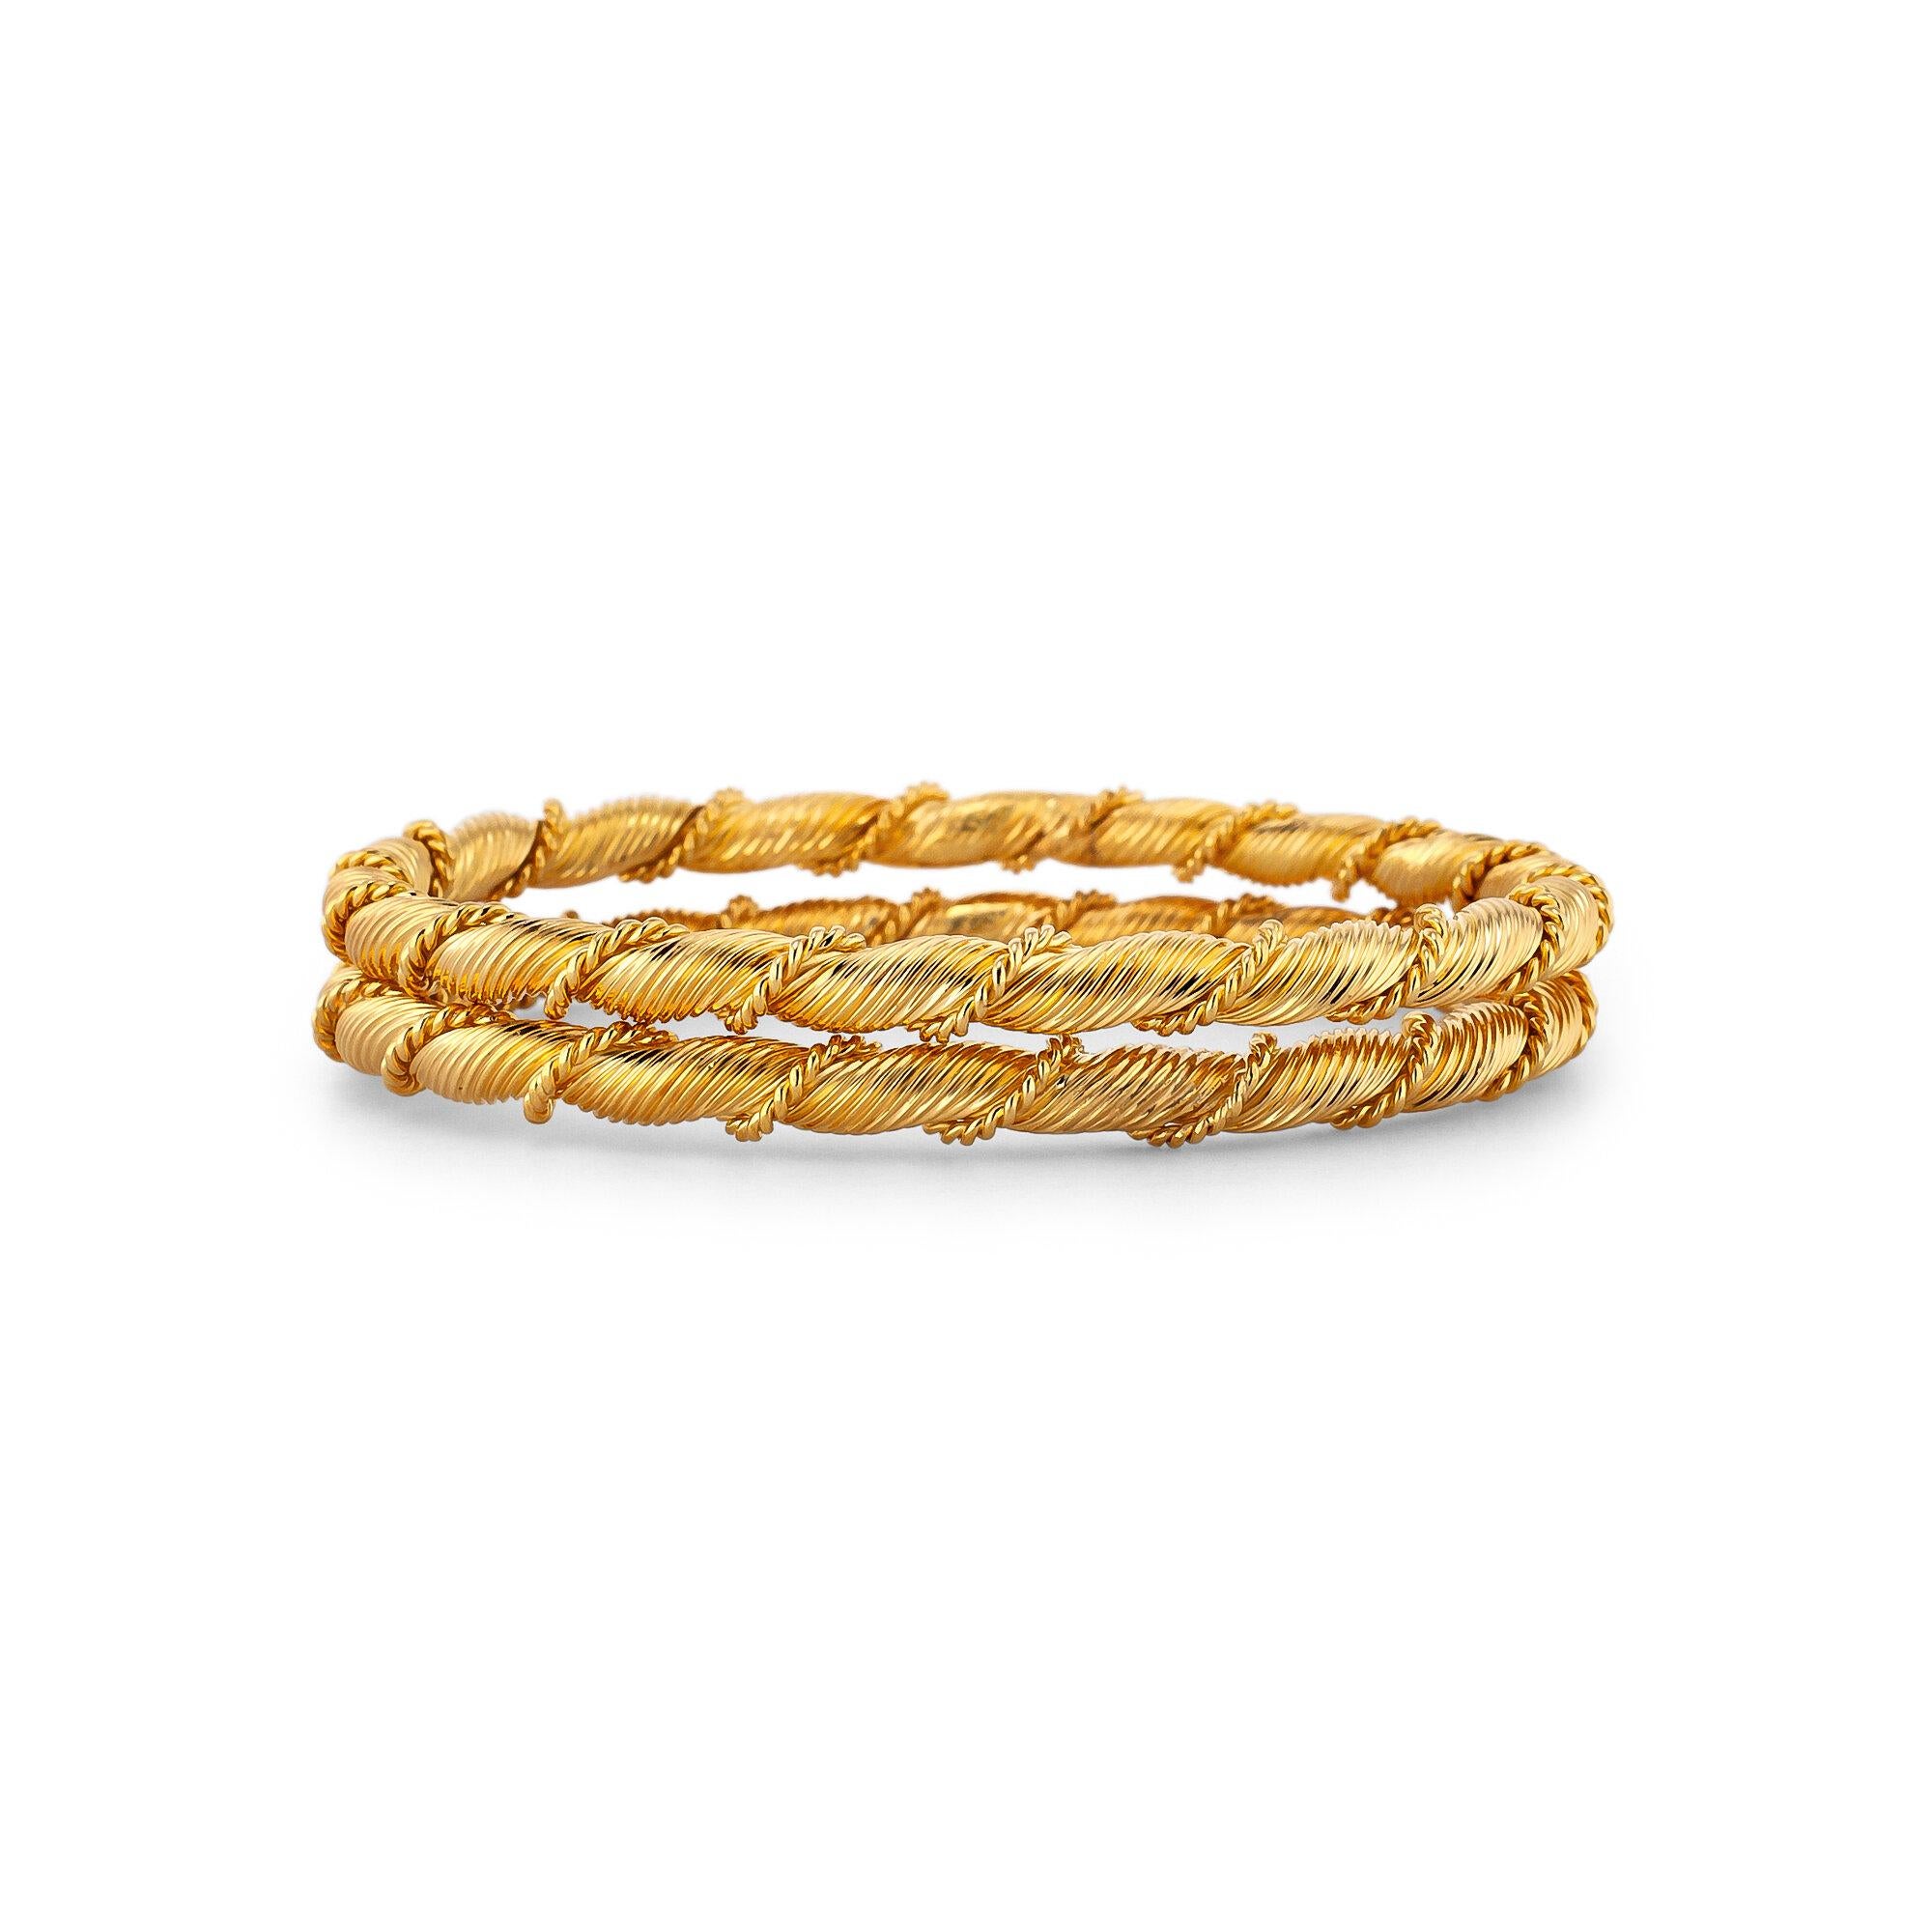 This pair of Van Cleef & Arpels France vintage twisted yellow gold bangle bracelets will always give you the double exposure you crave. Signed VCA France with serial numbers 2V7756 and 2V7747. Circa 1970.  18 karat yellow gold.  Size medium. 